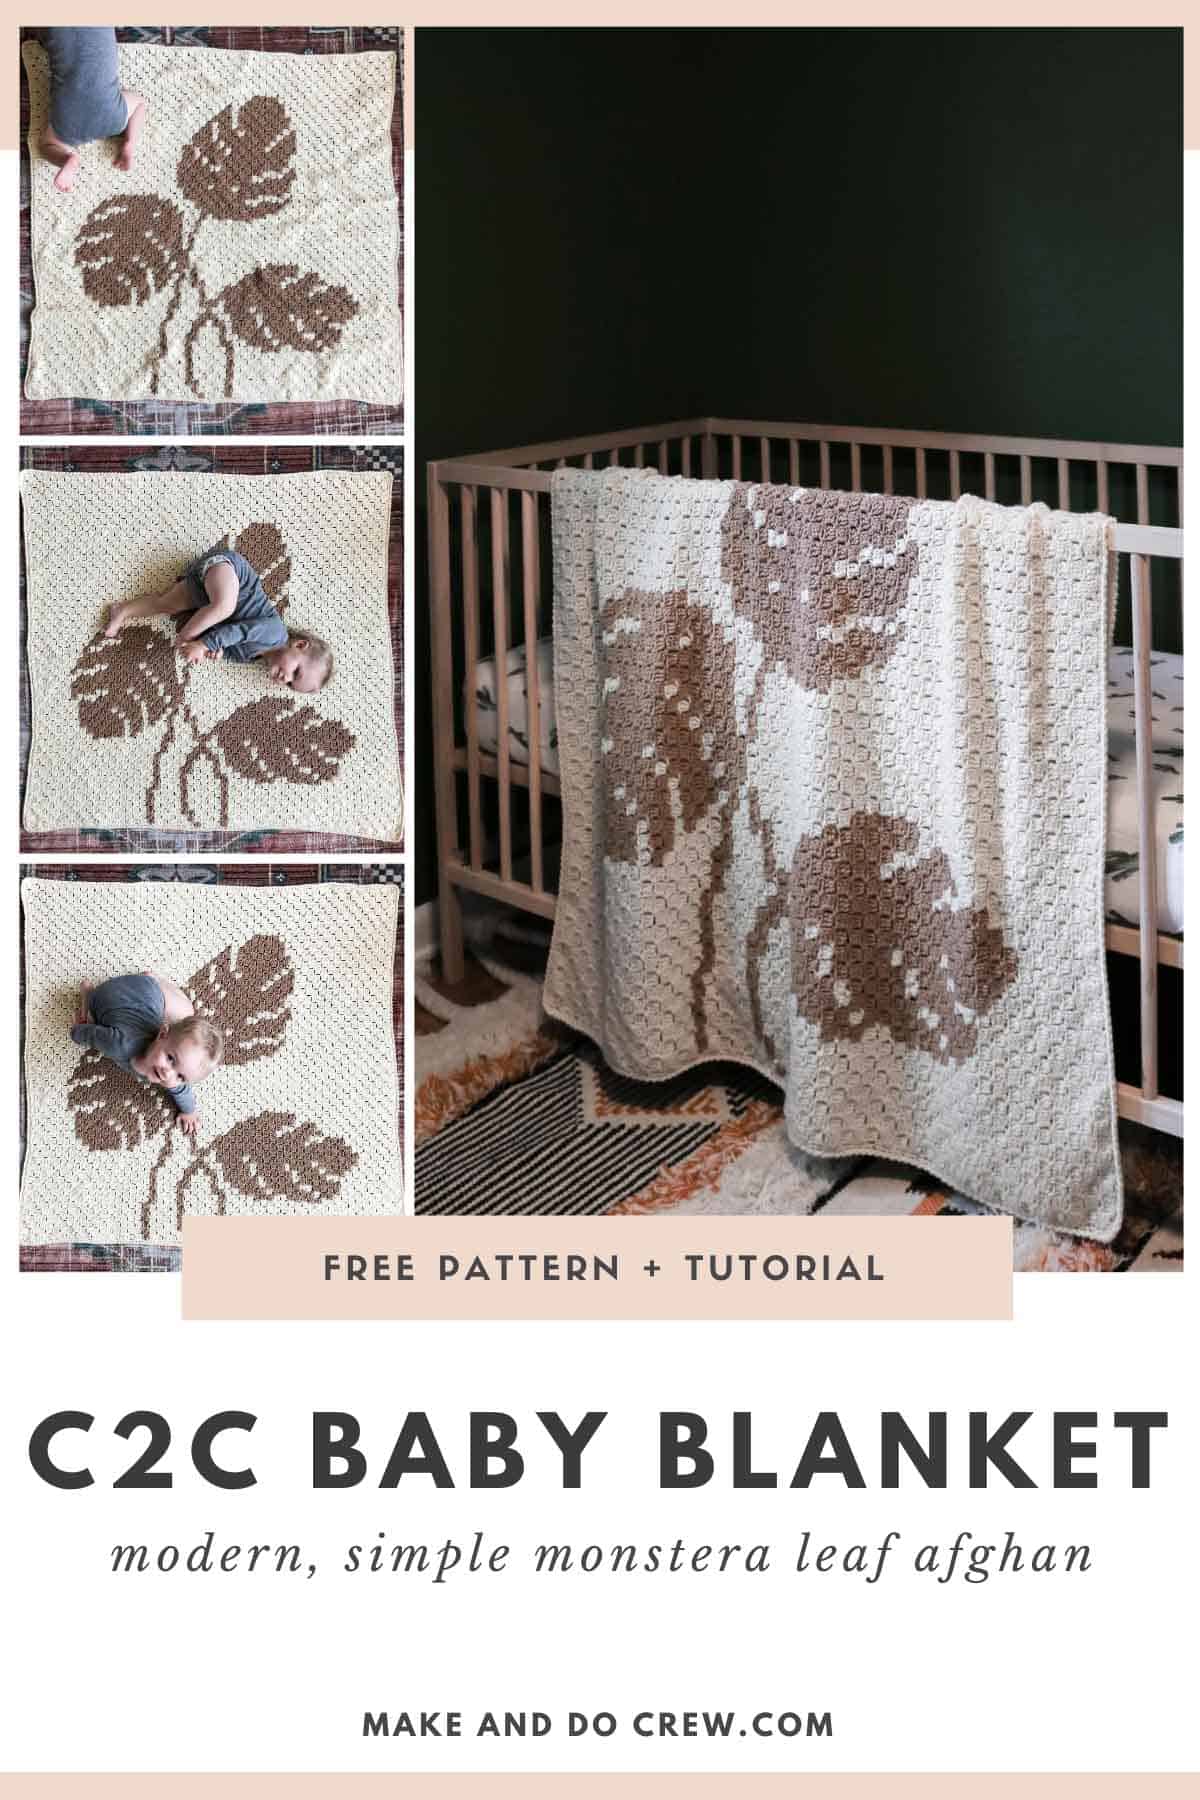 A grid of photos of a baby rolling on a modern, monochromatic corner to corner crochet blanket featuring the beautiful "swiss cheese" monstera leaves.